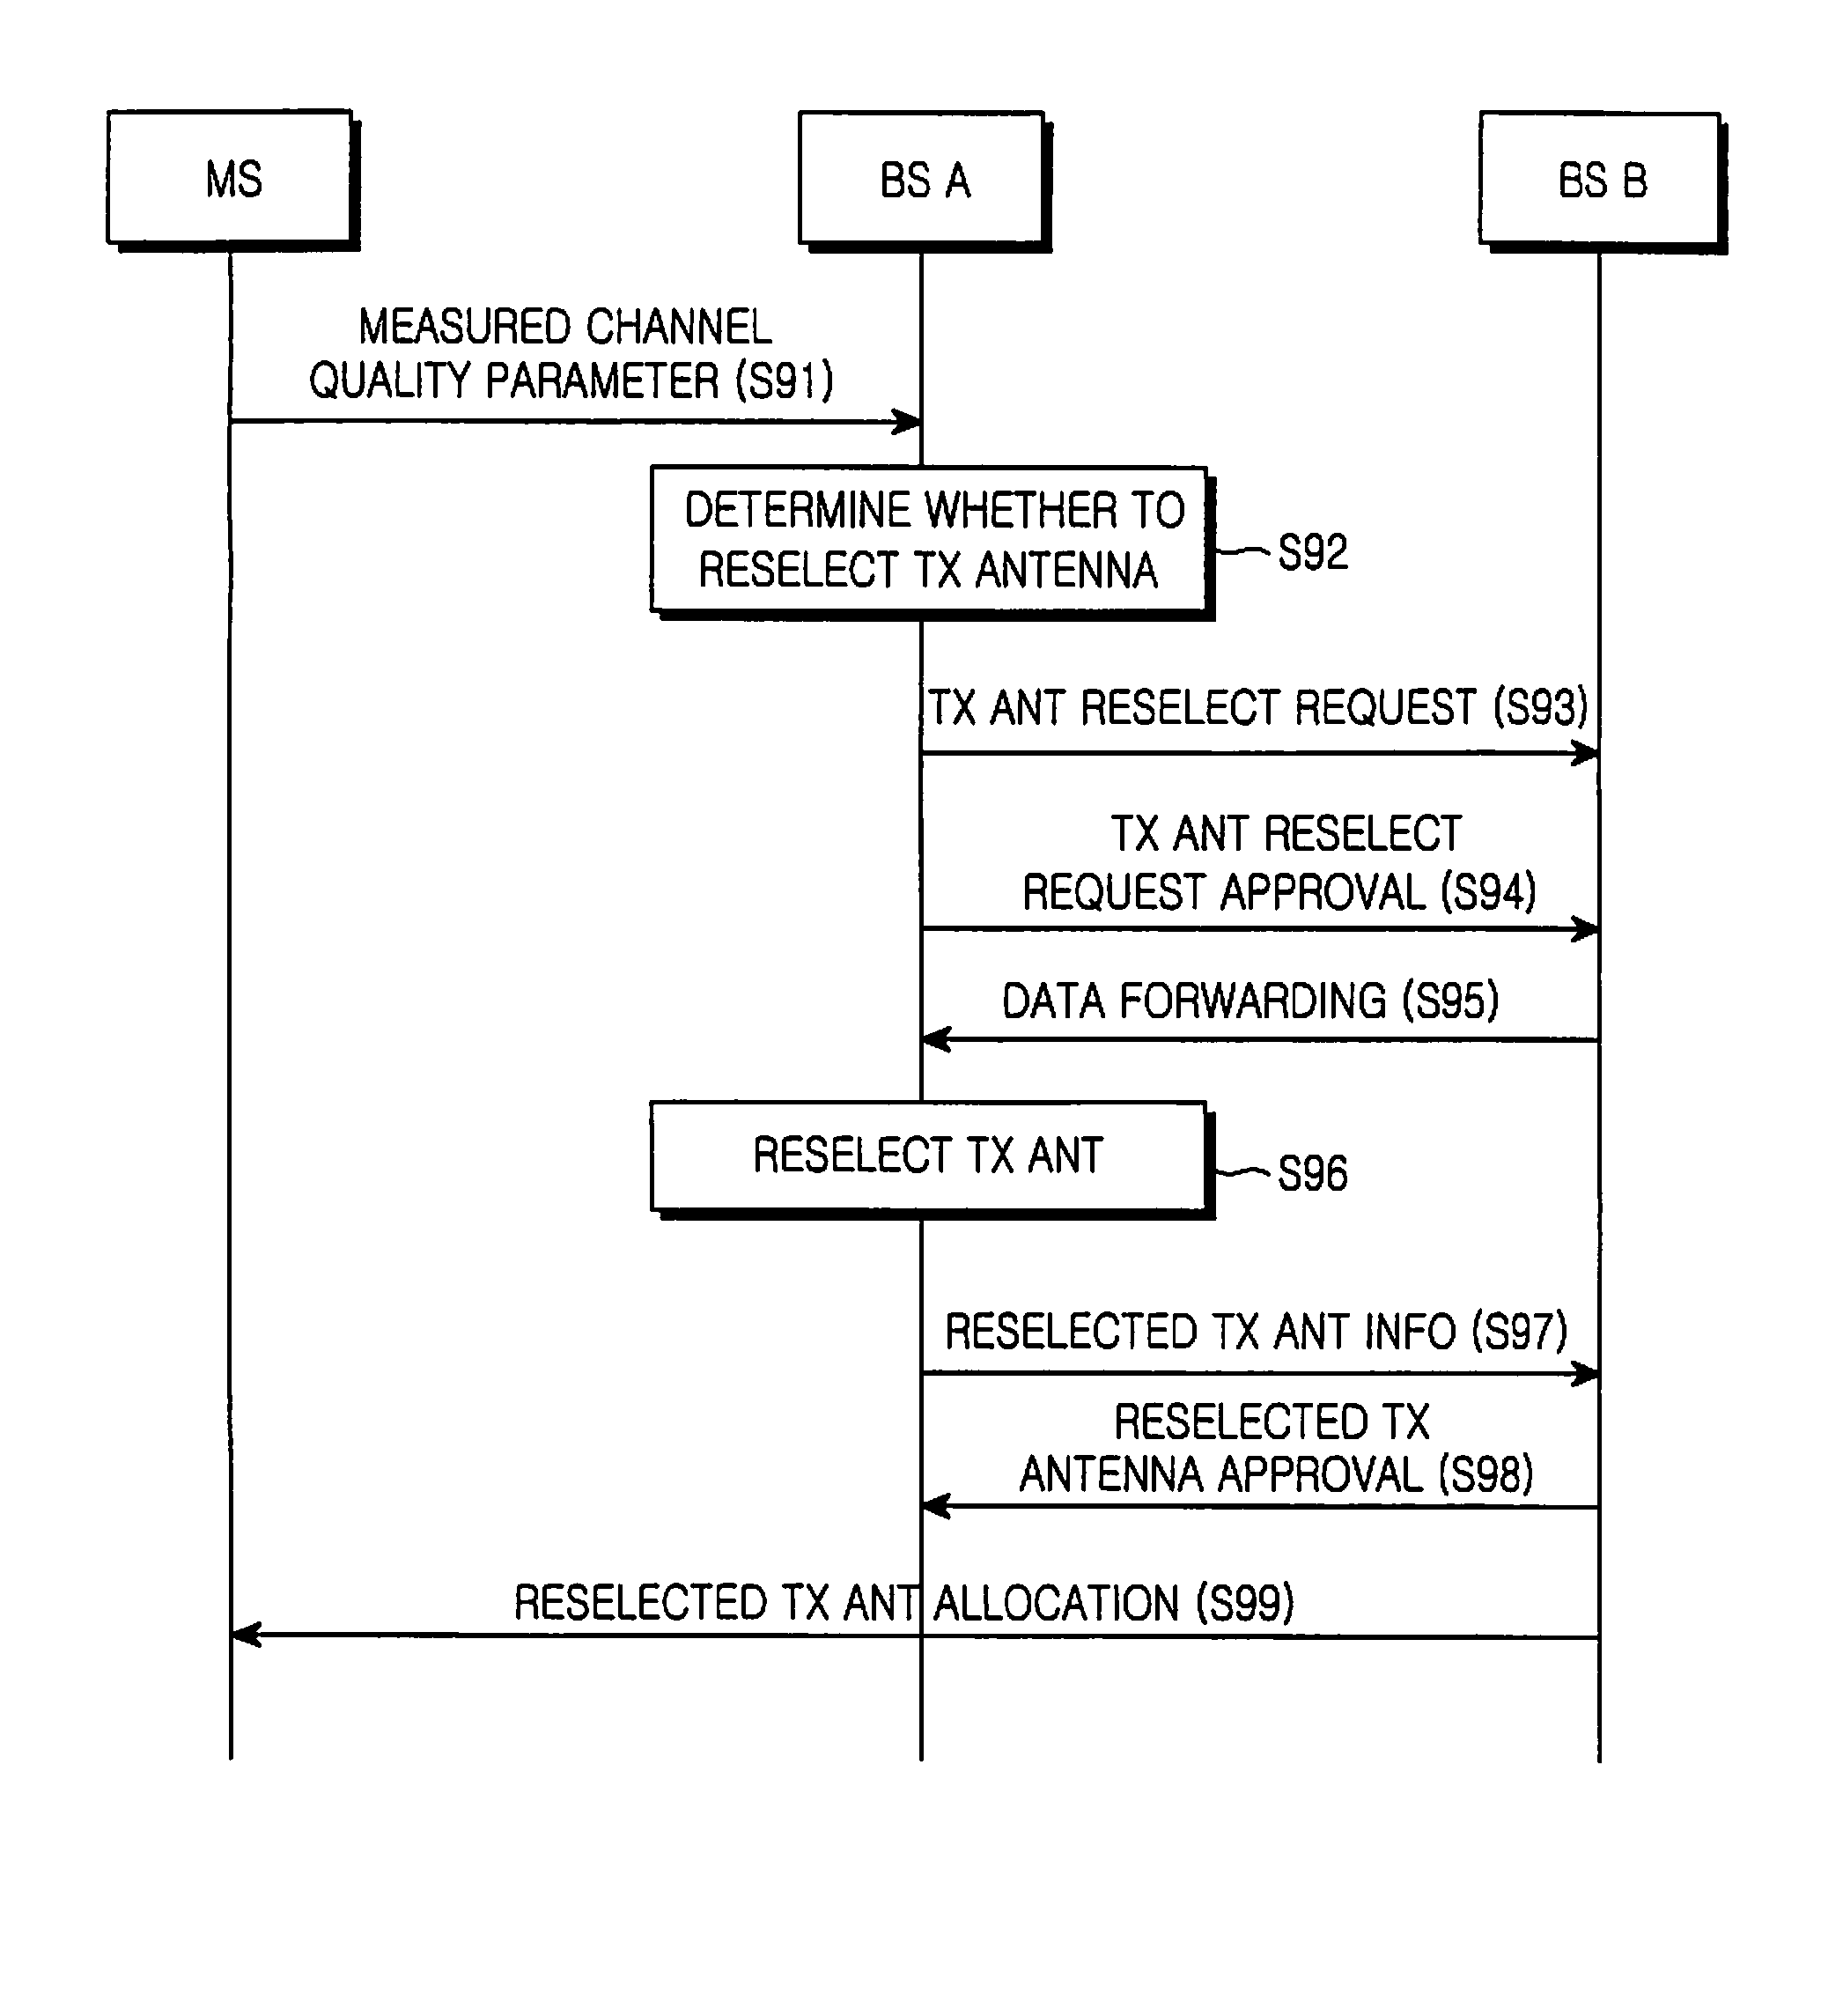 System and method for reselecting antennas in a cellular mobile communication system using multiple antennas